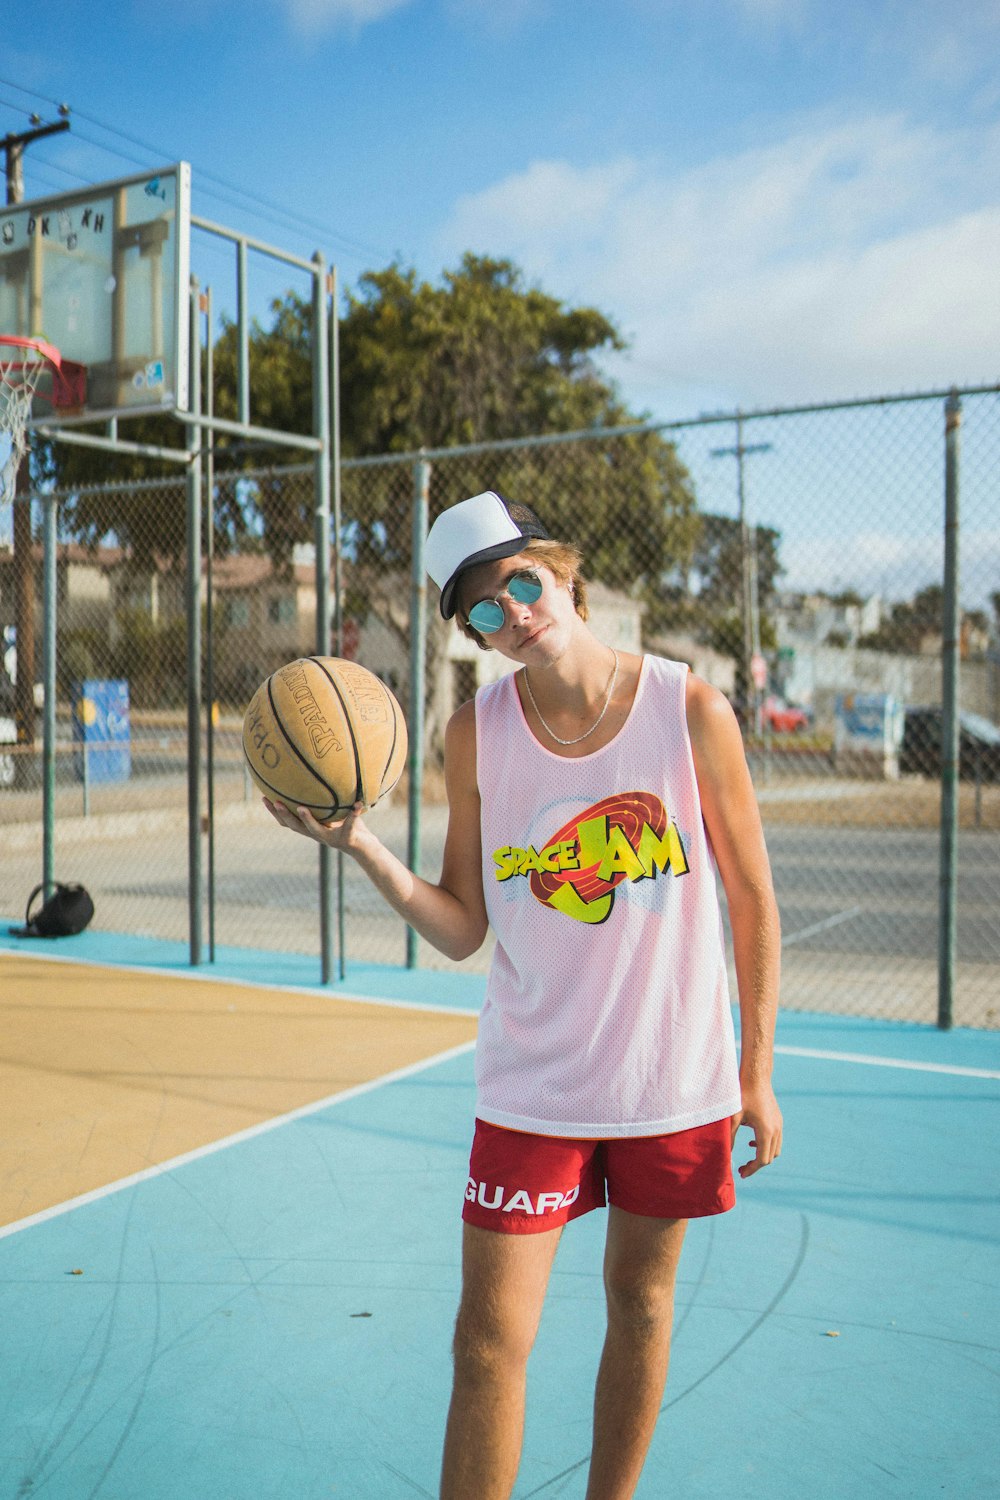 man wearing white tank top and red shorts